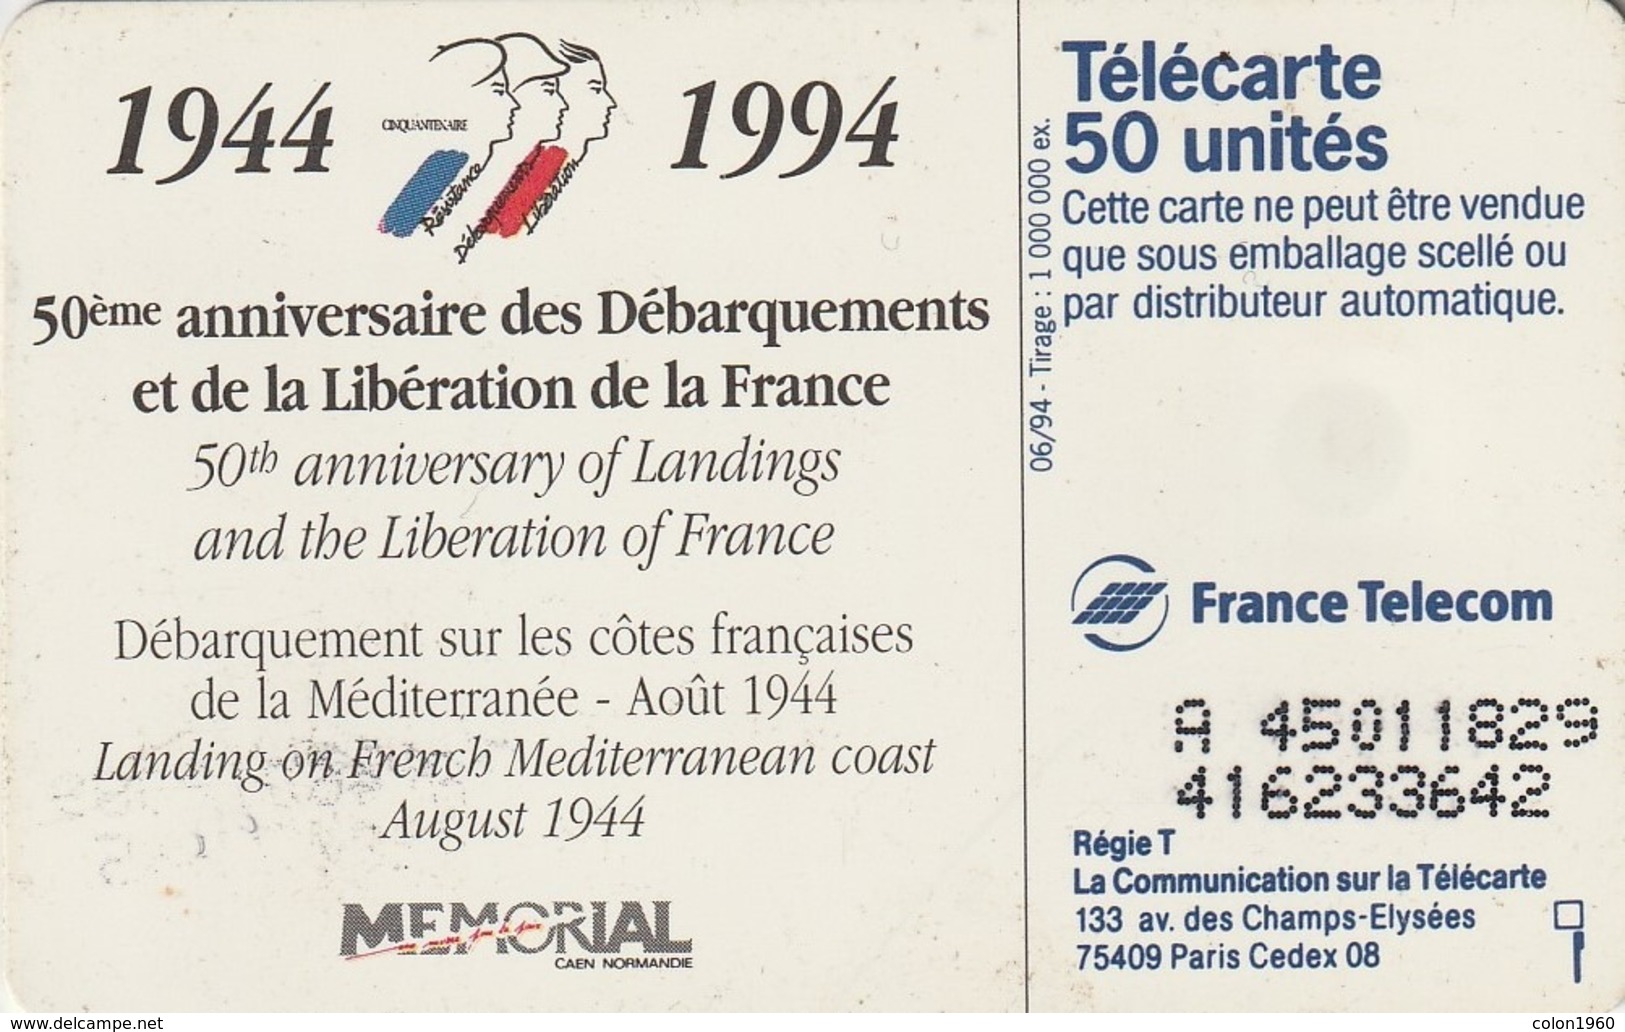 FRANCIA. 50th Anniversar Of Landings And The Liberation Of France. Debarquement Sur Les Cotes US47. 0479A. 06/94. (306). - Esercito